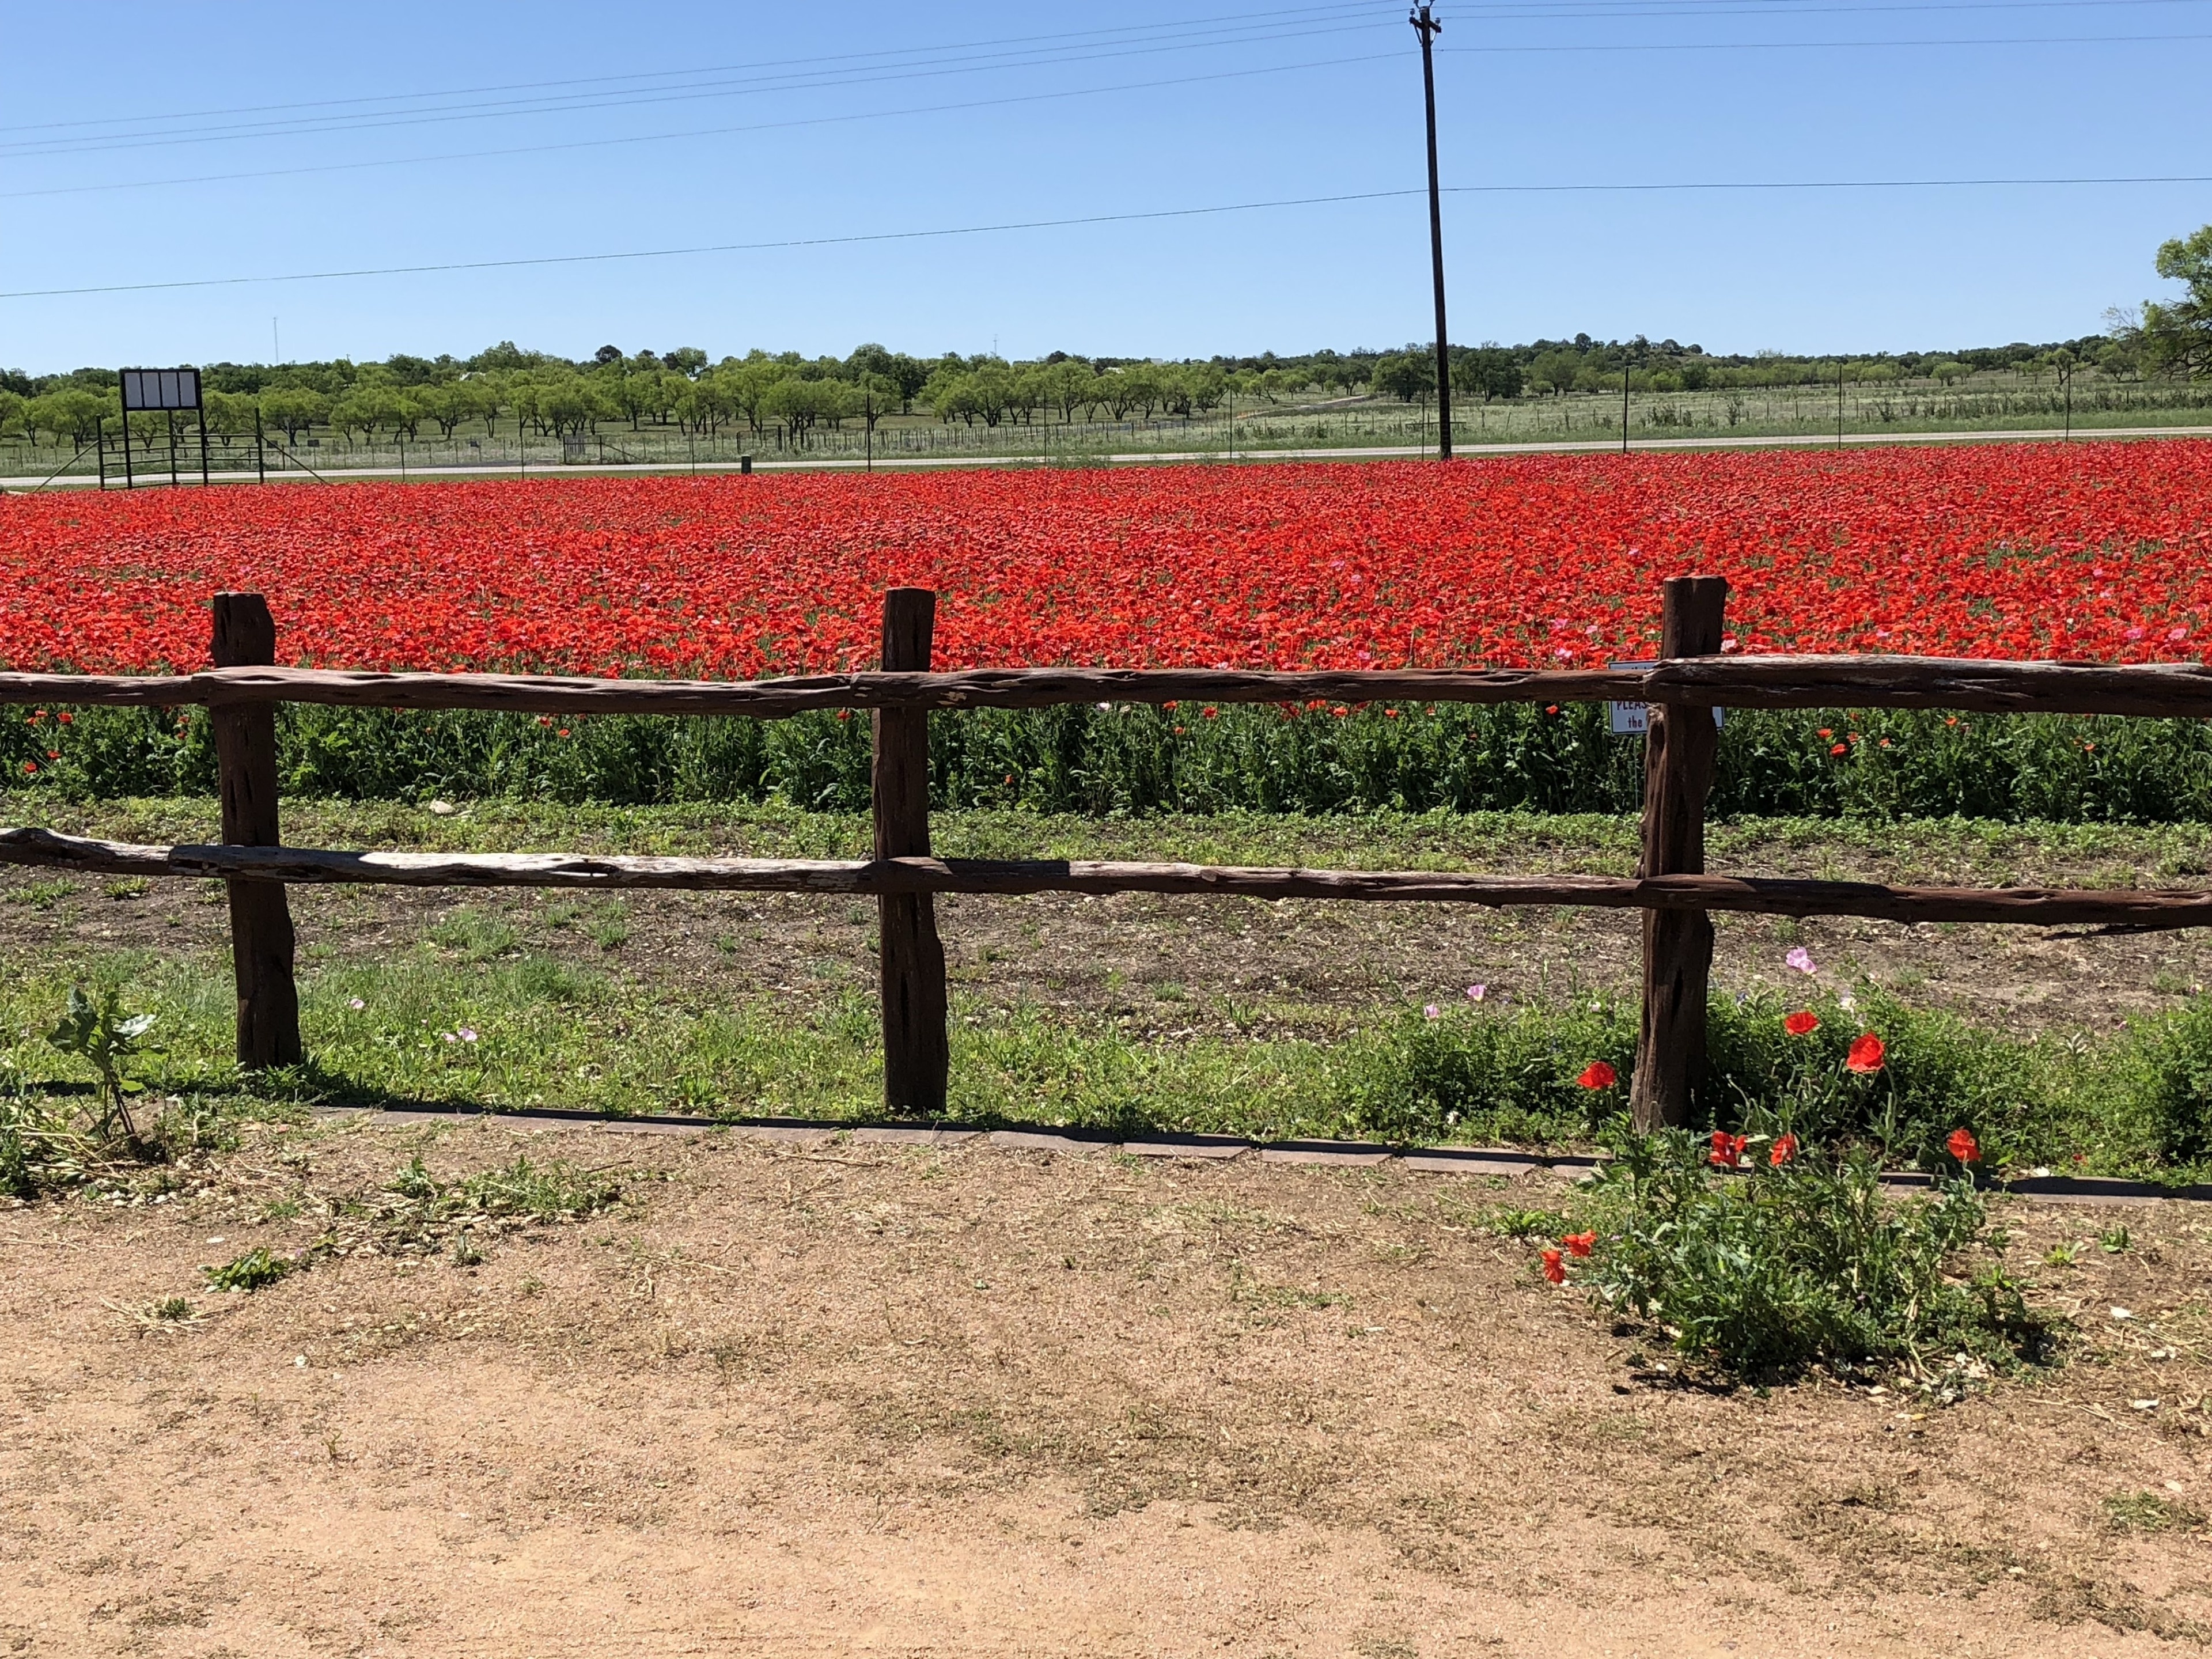 Red poppies!!!